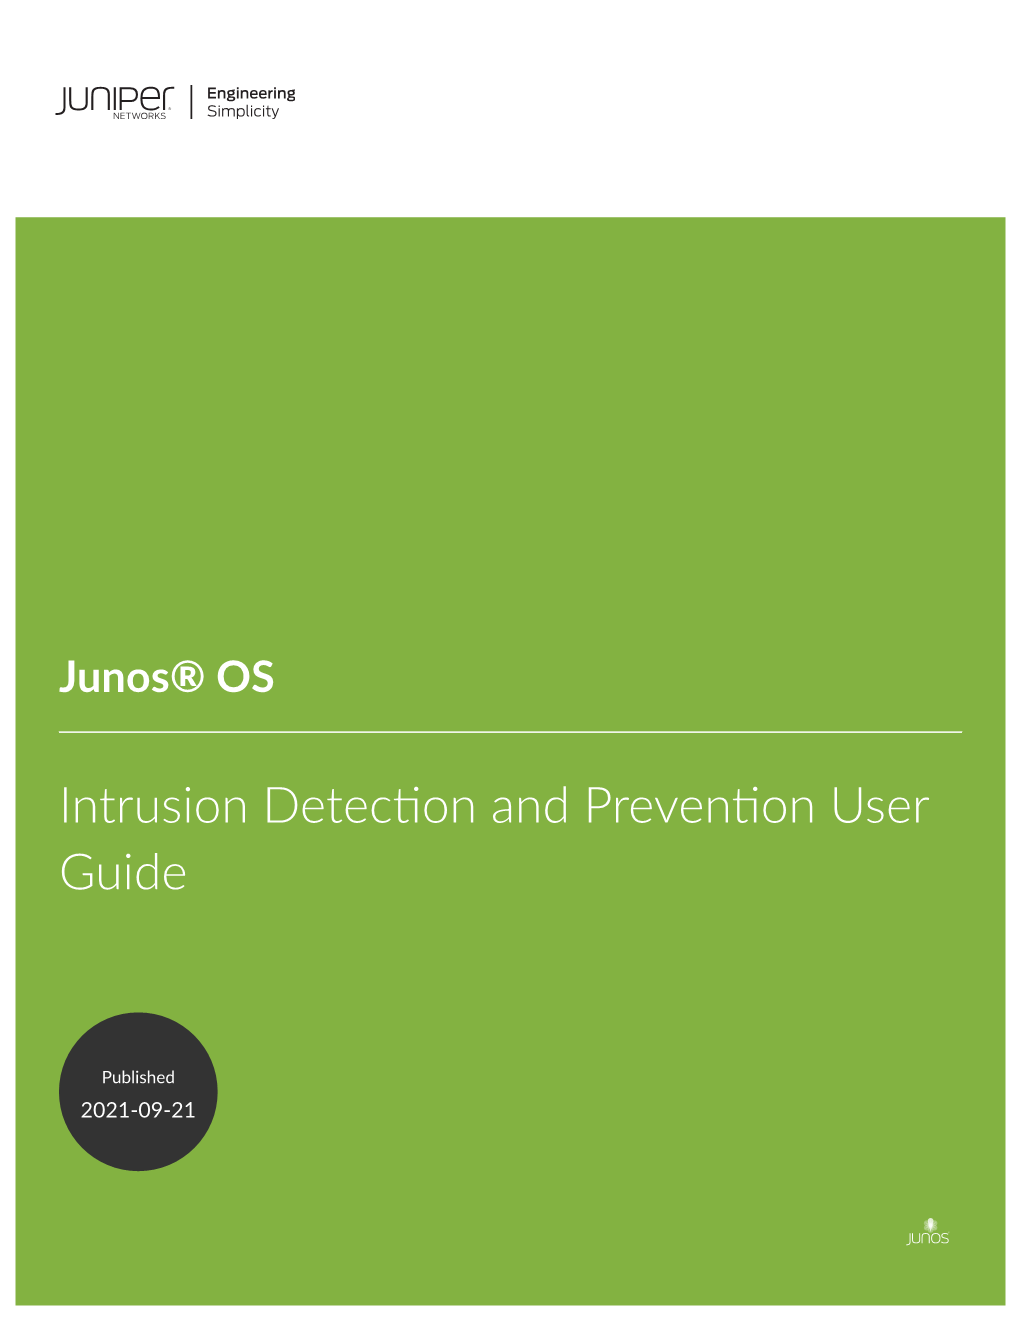 Junos® OS Intrusion Detection and Prevention User Guide Copyright © 2021 Juniper Networks, Inc